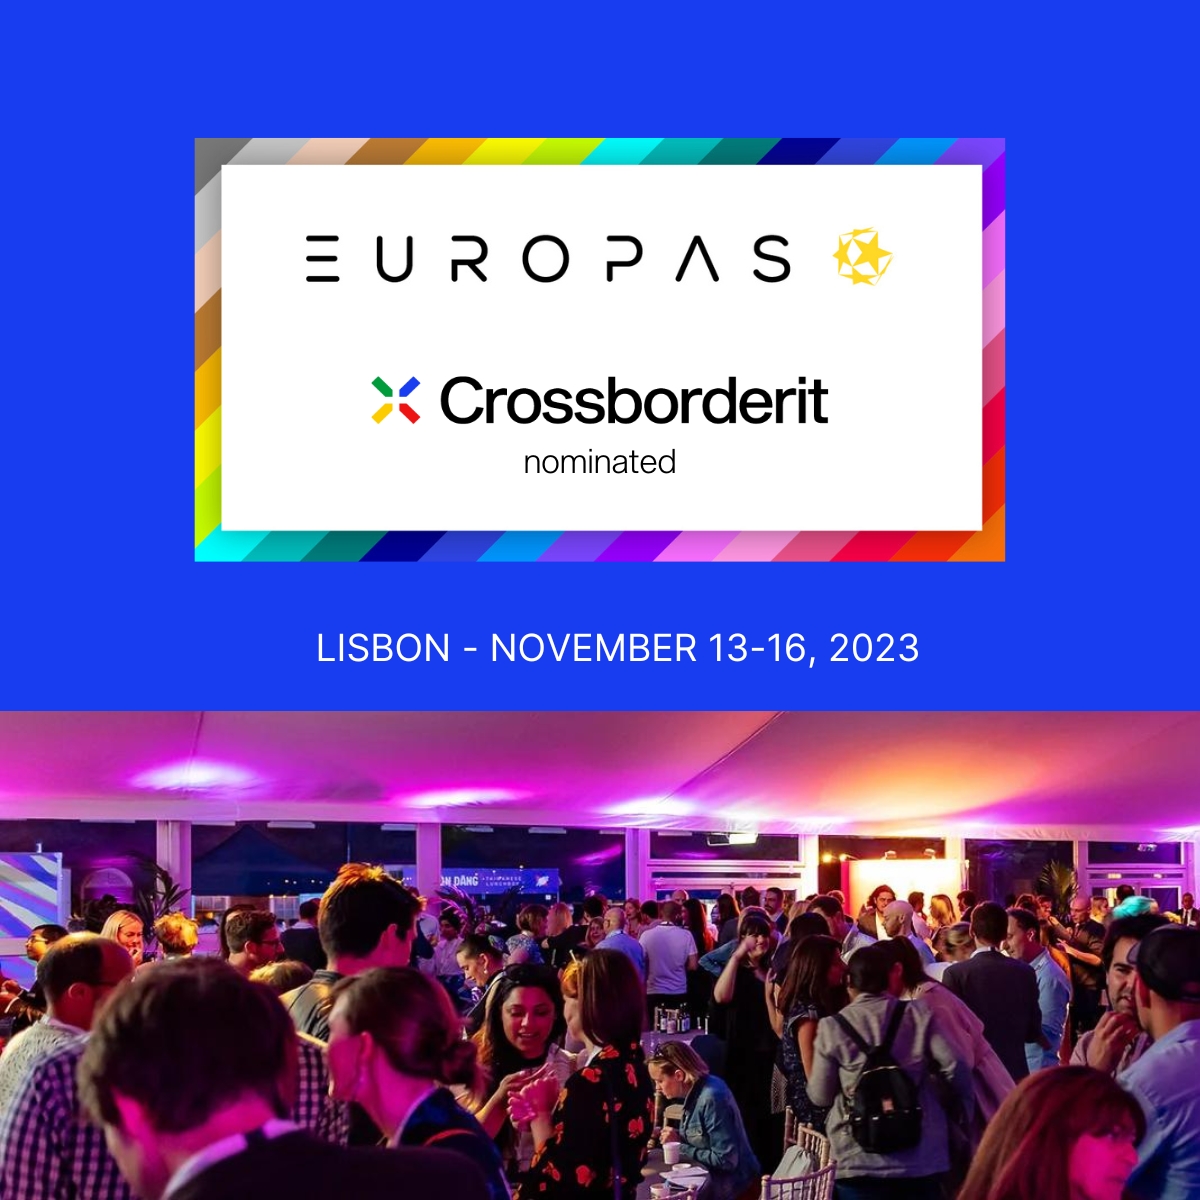 This year, #TheEuropas will be co-located with Web Summit, the world's largest #technologyconference. This is an exciting opportunity for us to showcase #Crossborderit solutions to a global audience and connect with potential customers and partners from around the world...